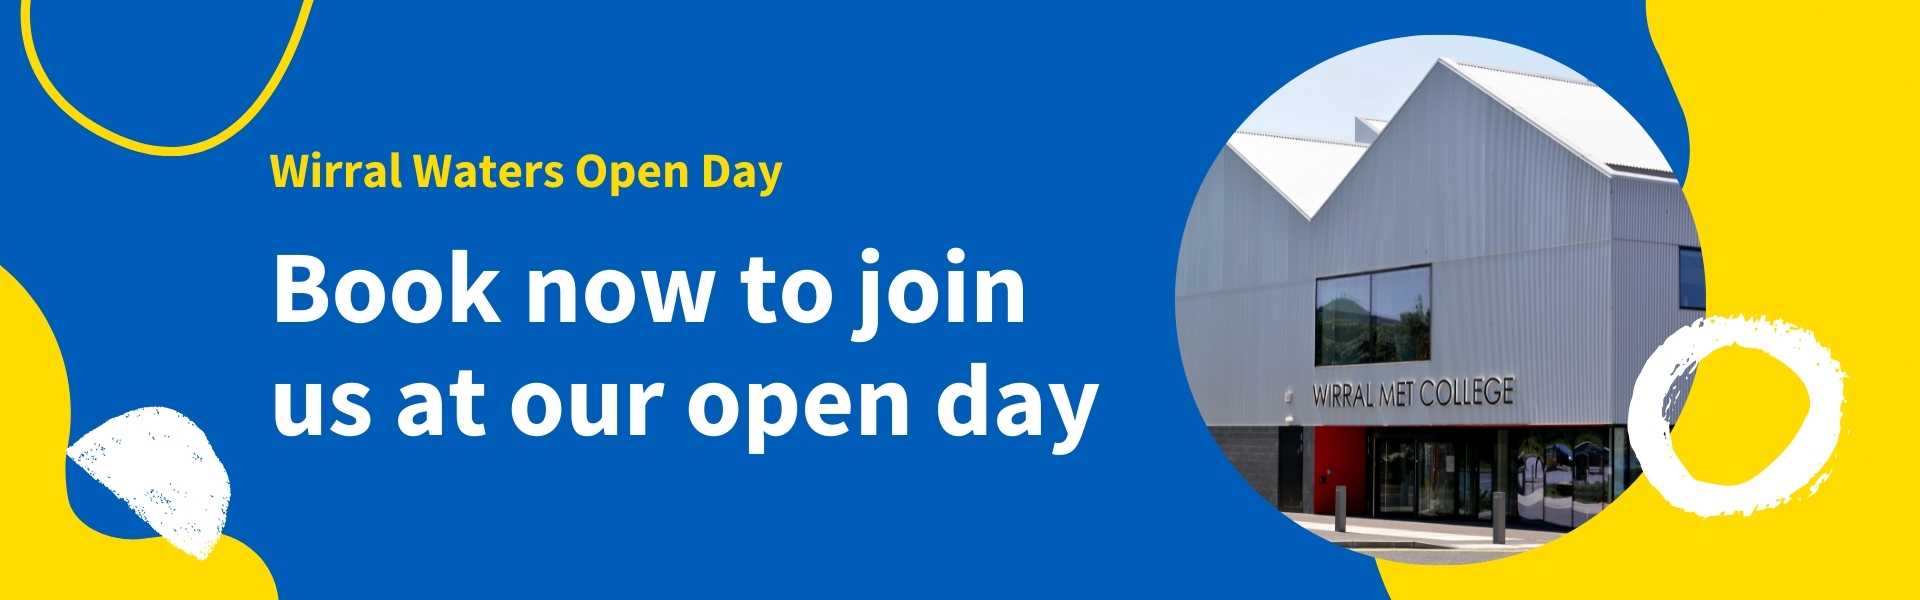 Book now to join us at our open day